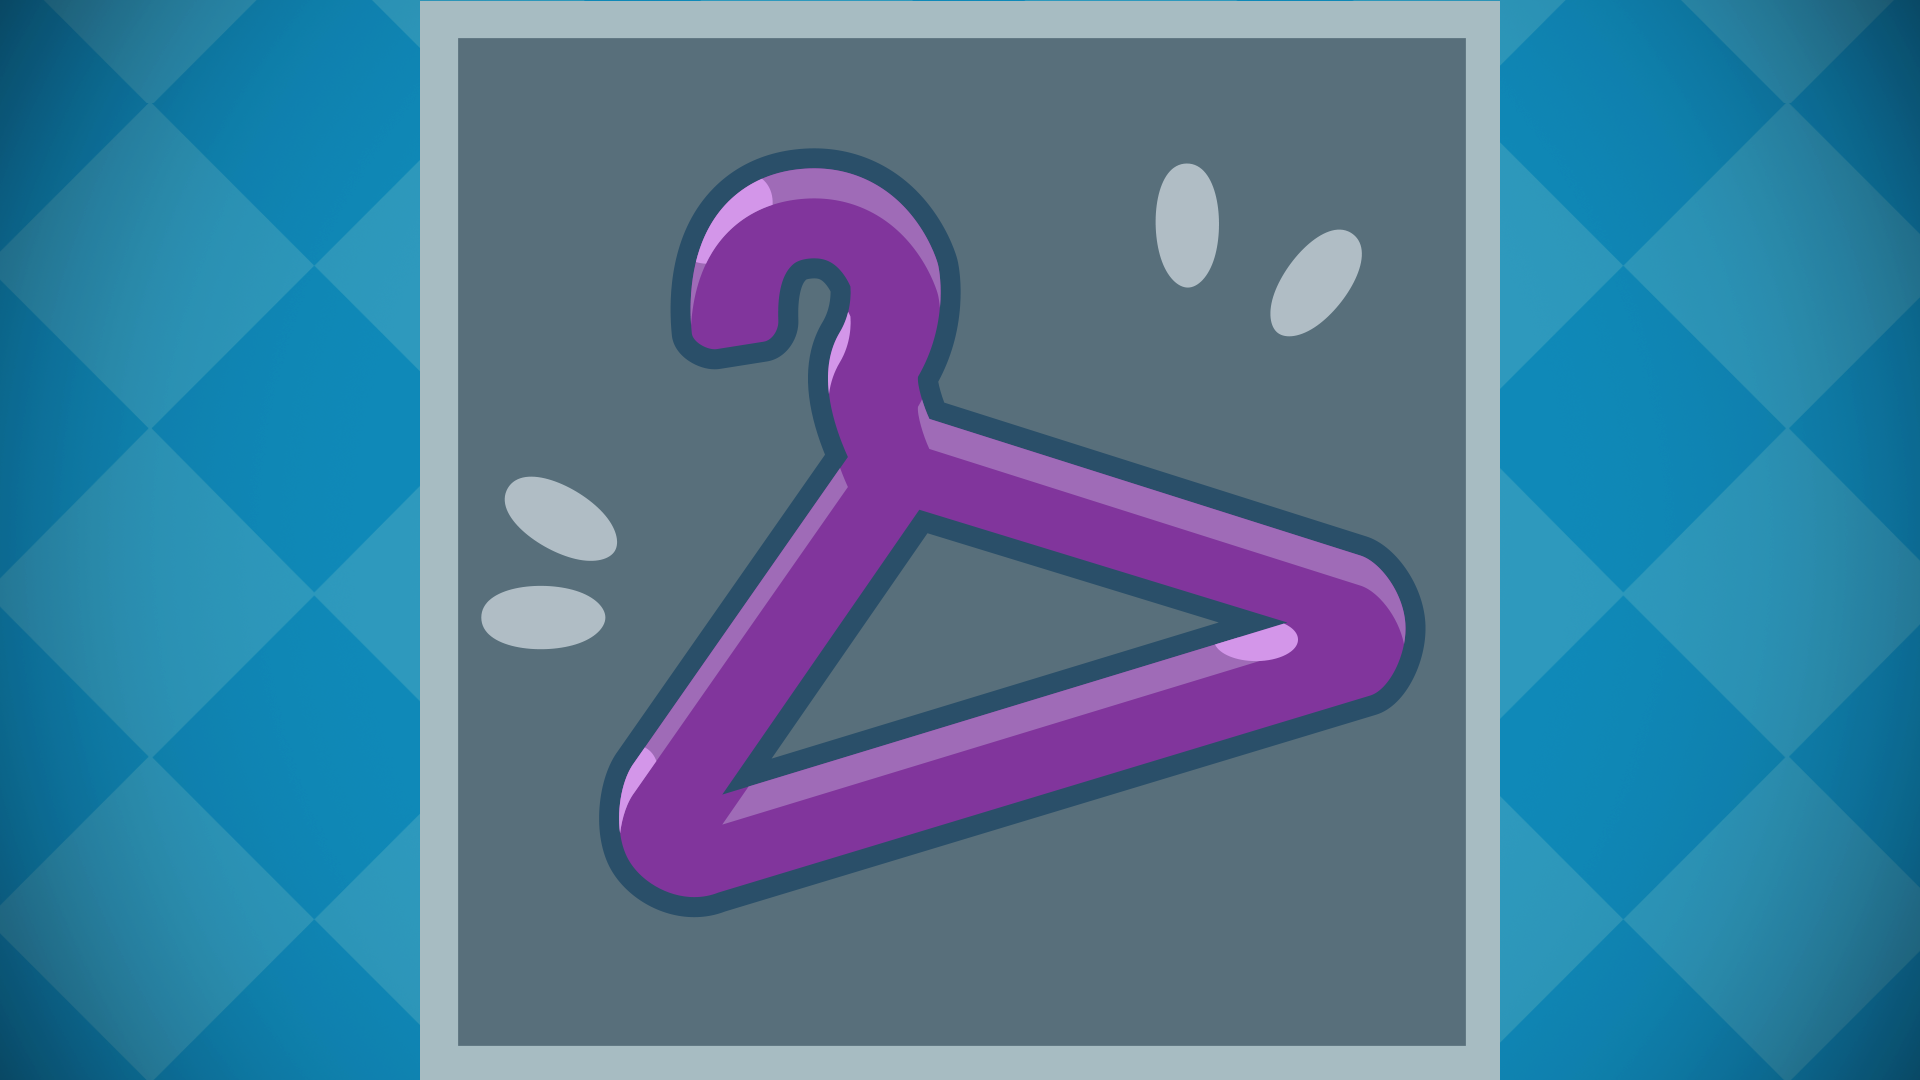 Icon for Costume Quest